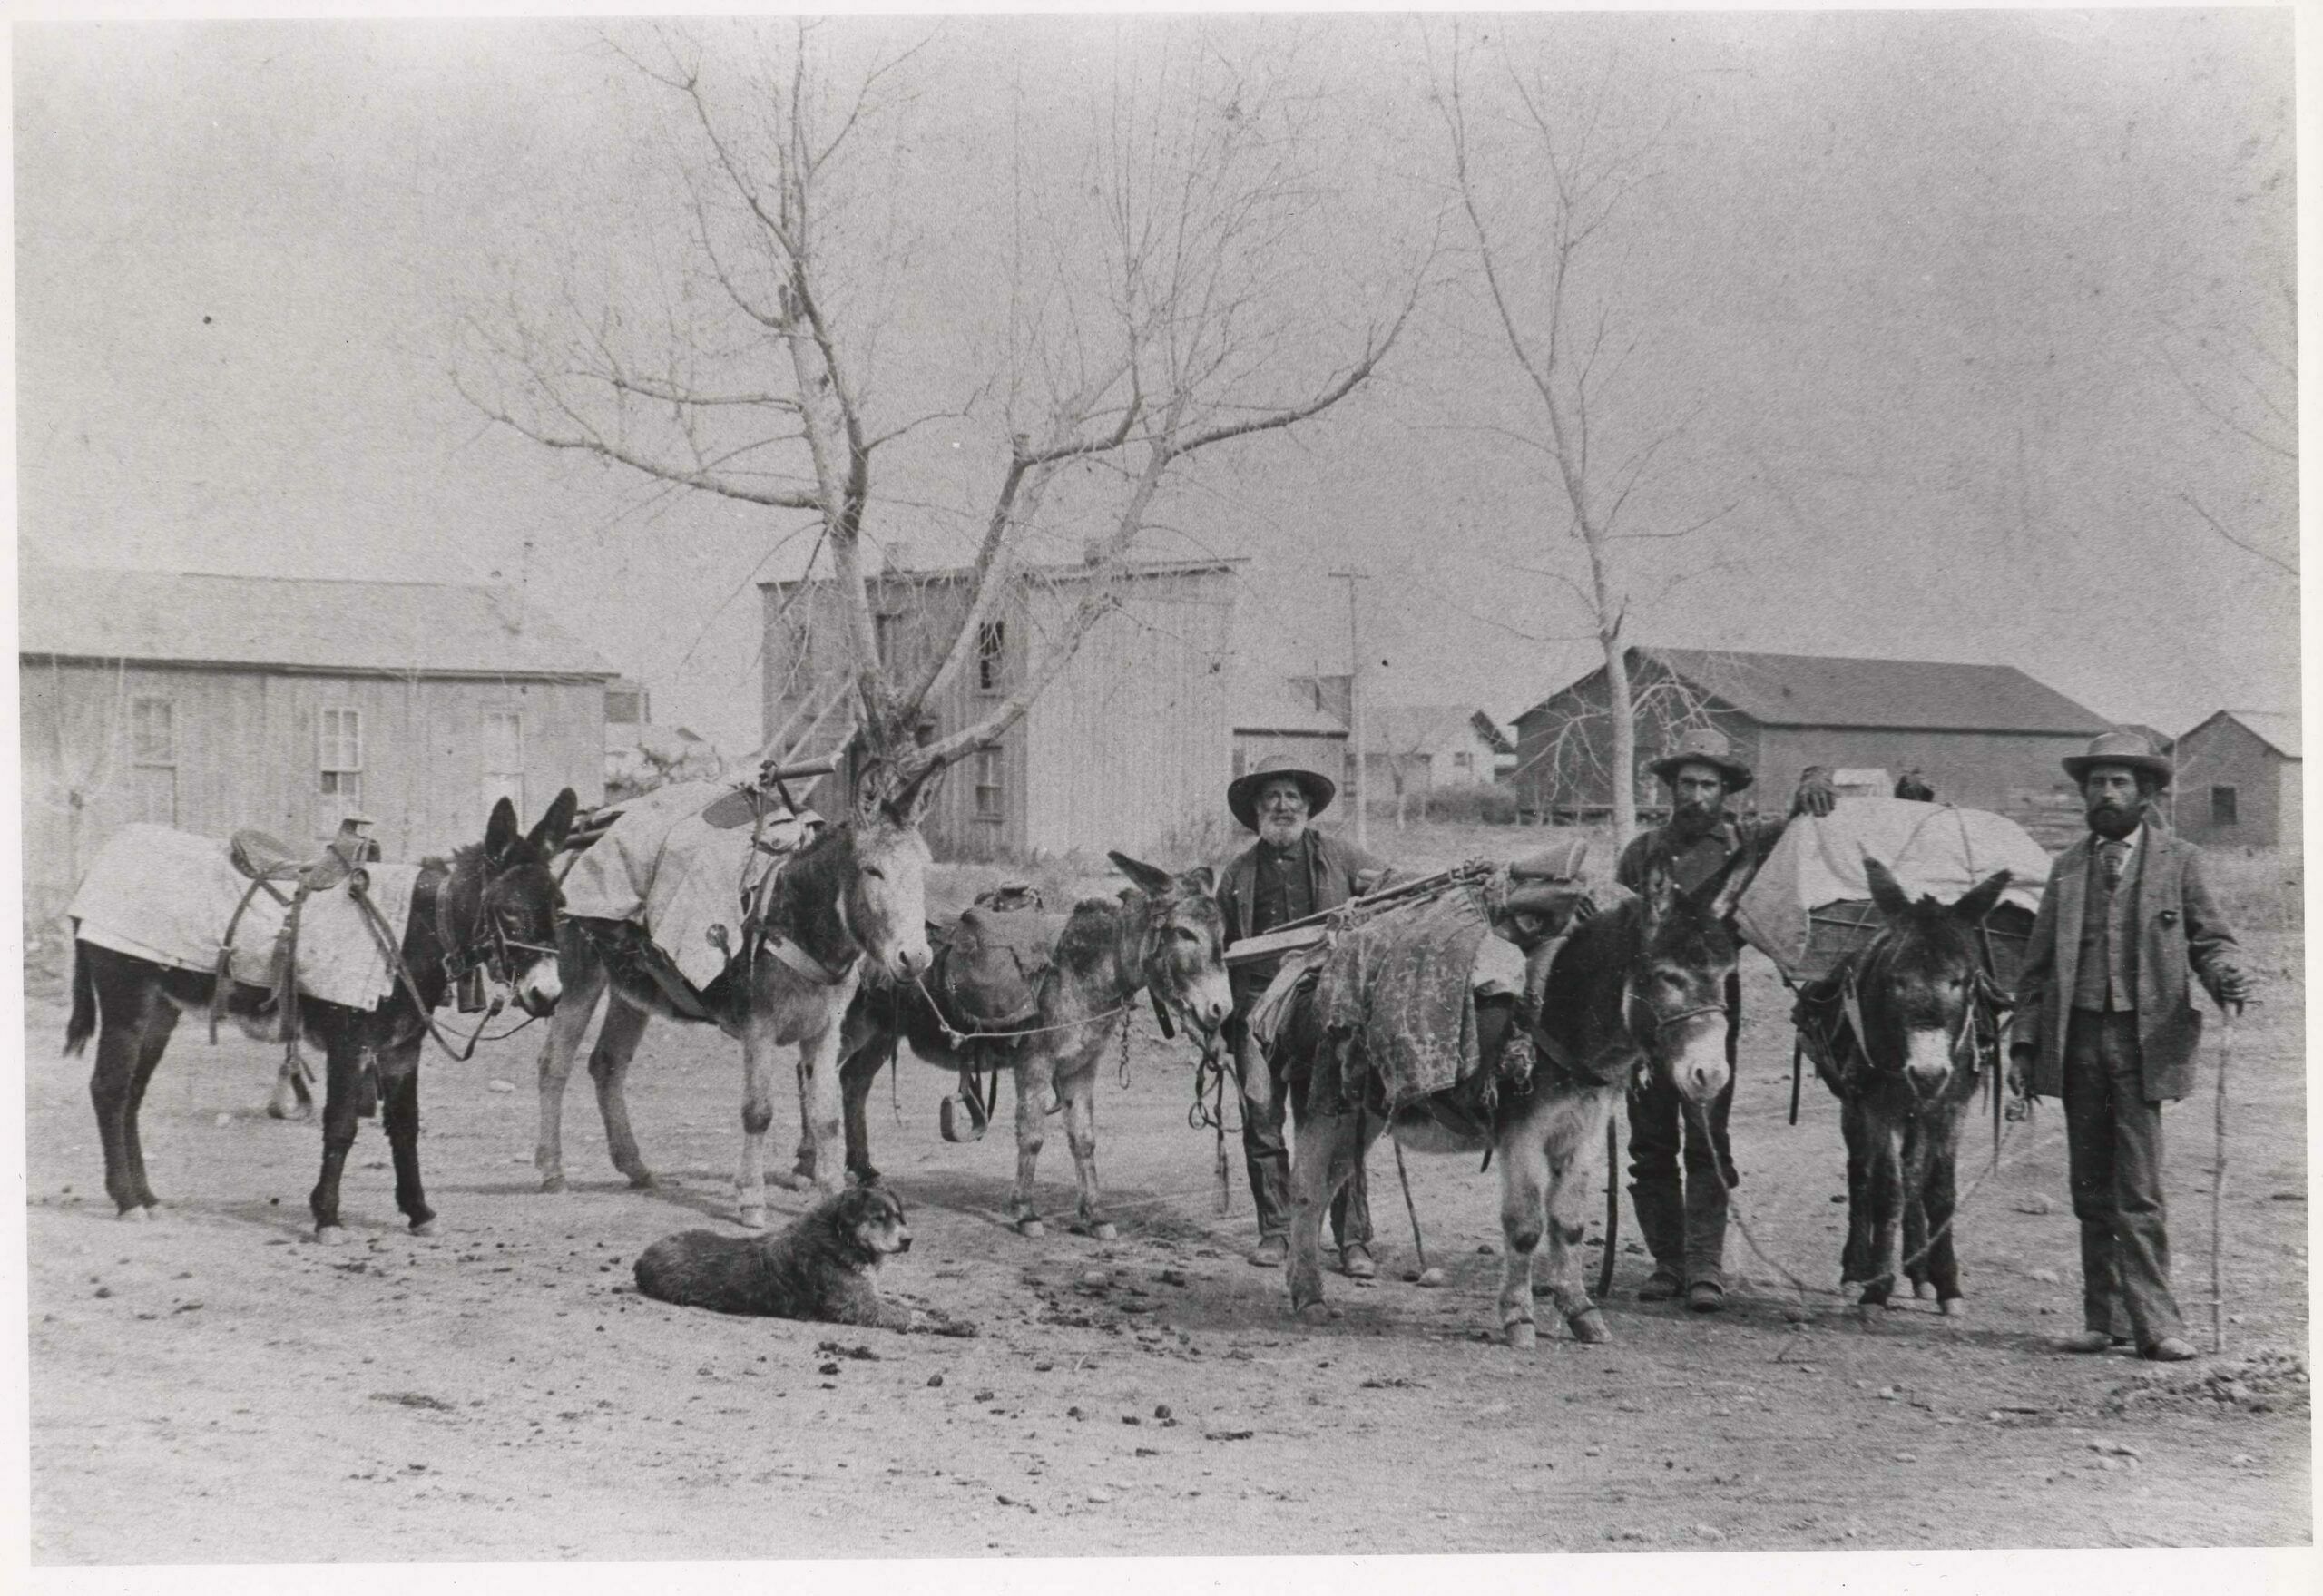 Once large numbers of people began congregating into towns, commercial meat hunters provided – for a time – much of the food before regular supply lines could be established. Camp gear, big bore rifles, a few burros, some pack saddles or old Army McClellan saddles, and a keen eye were all that was necessary. This hunting outfit heads out of Buena Vista in about 1879.  (1)